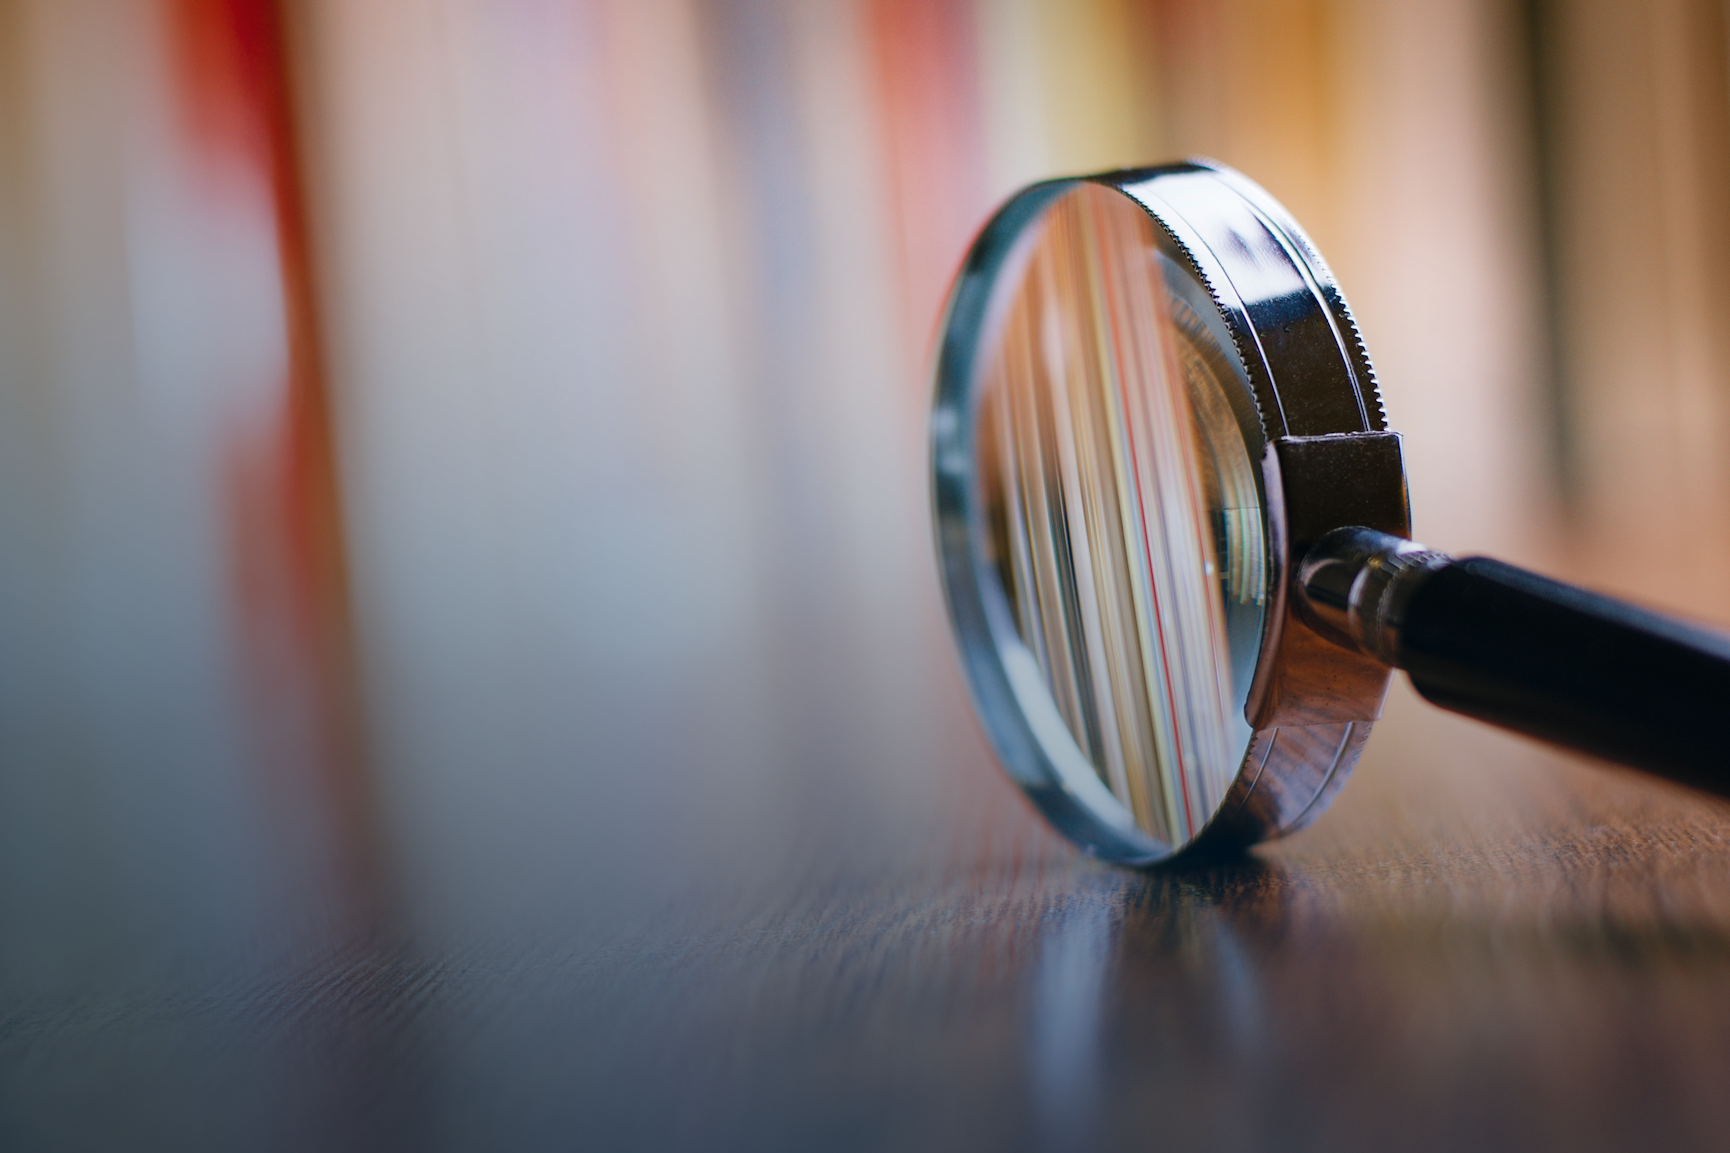 Magnifying glass on wooden table with blurry background